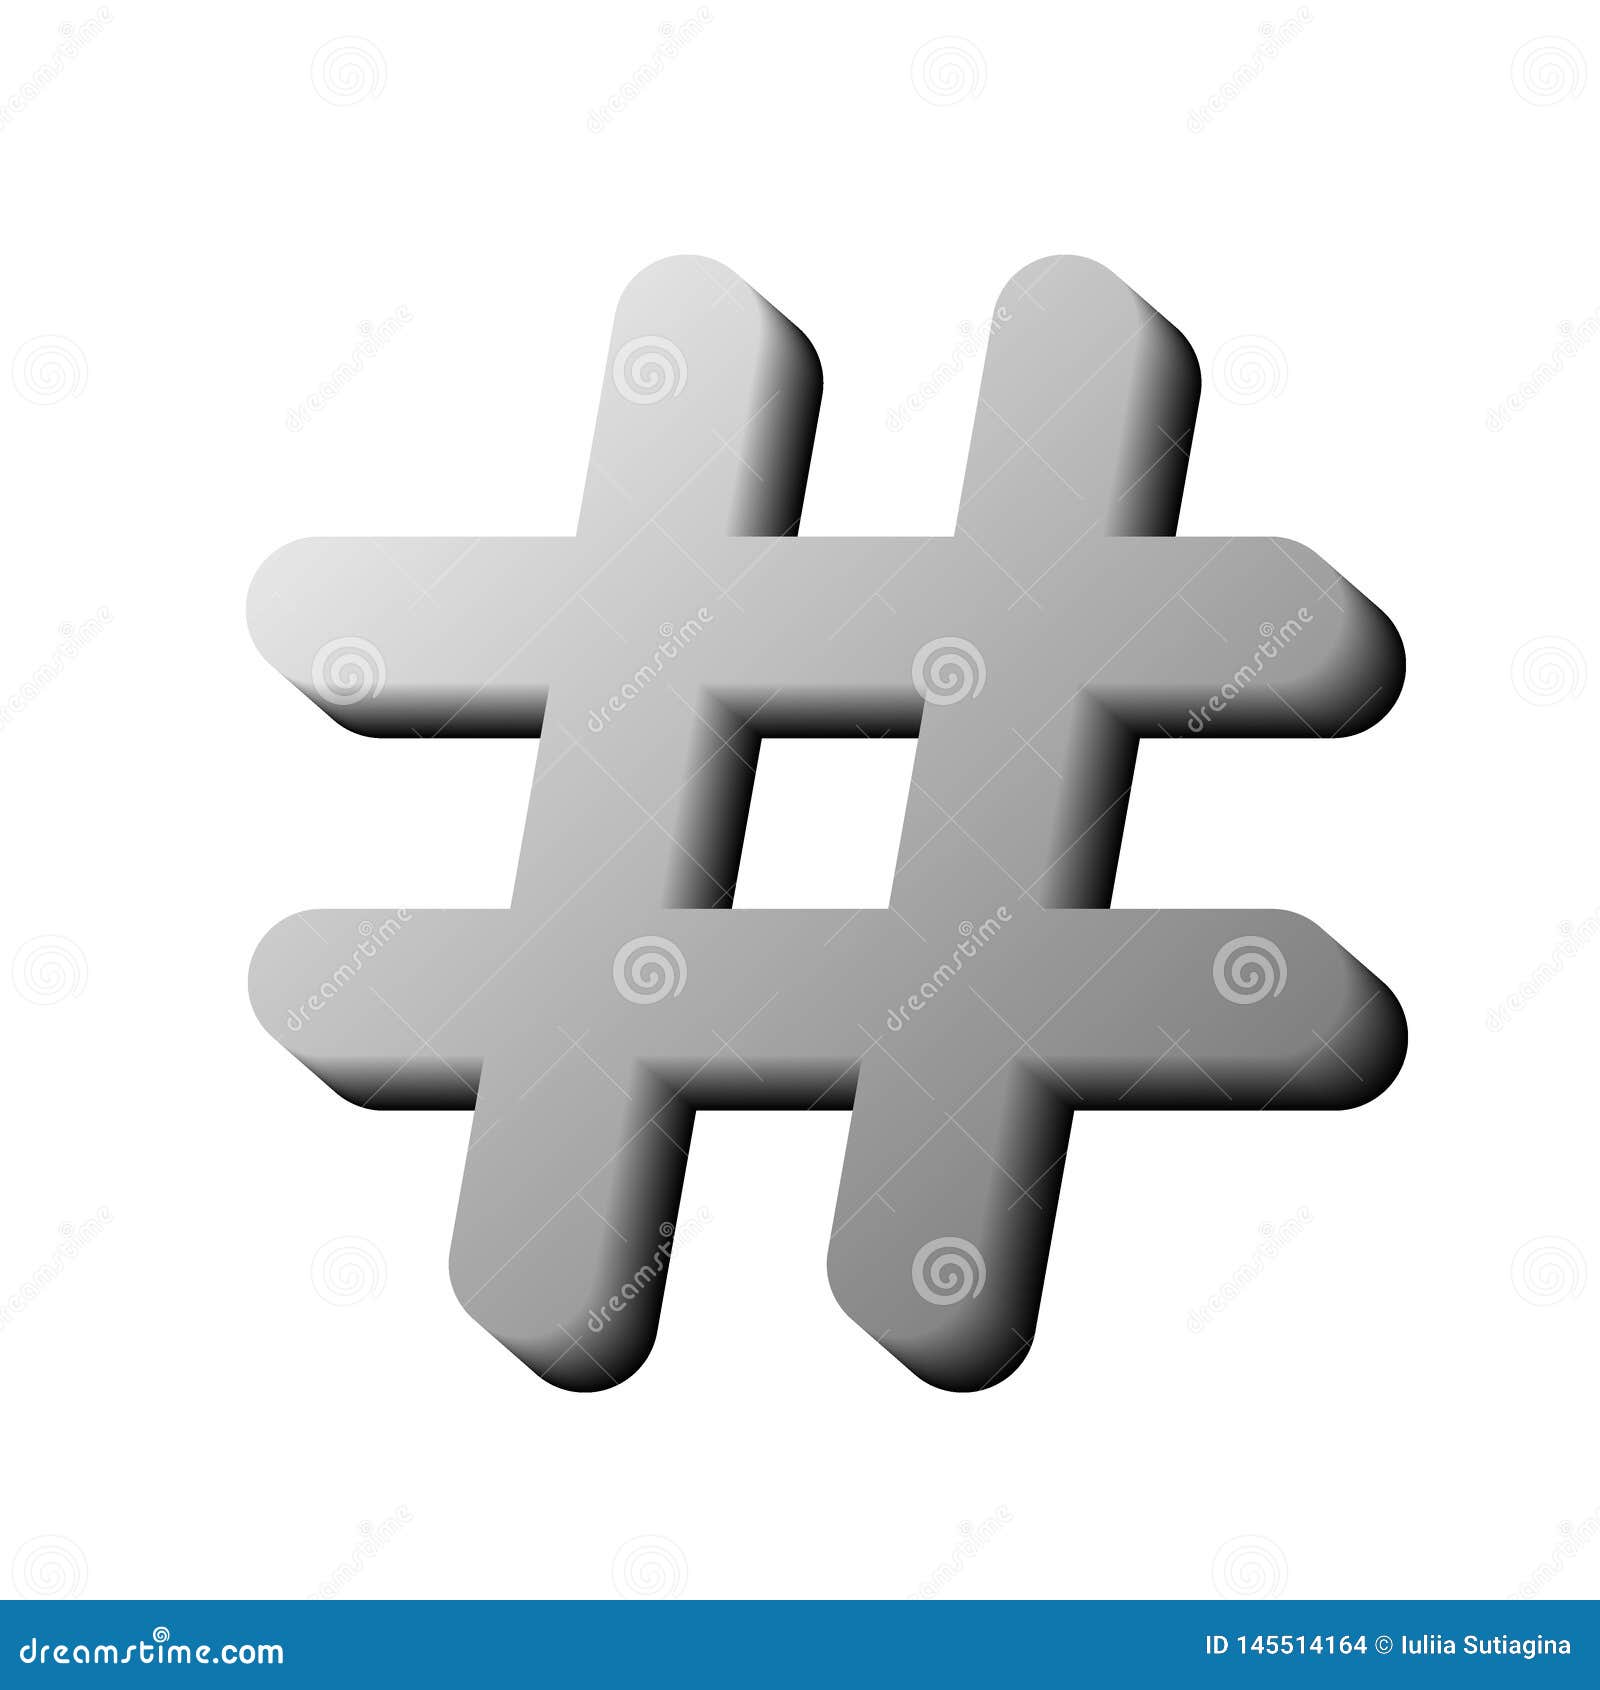 Hashtag png images | PNGWing